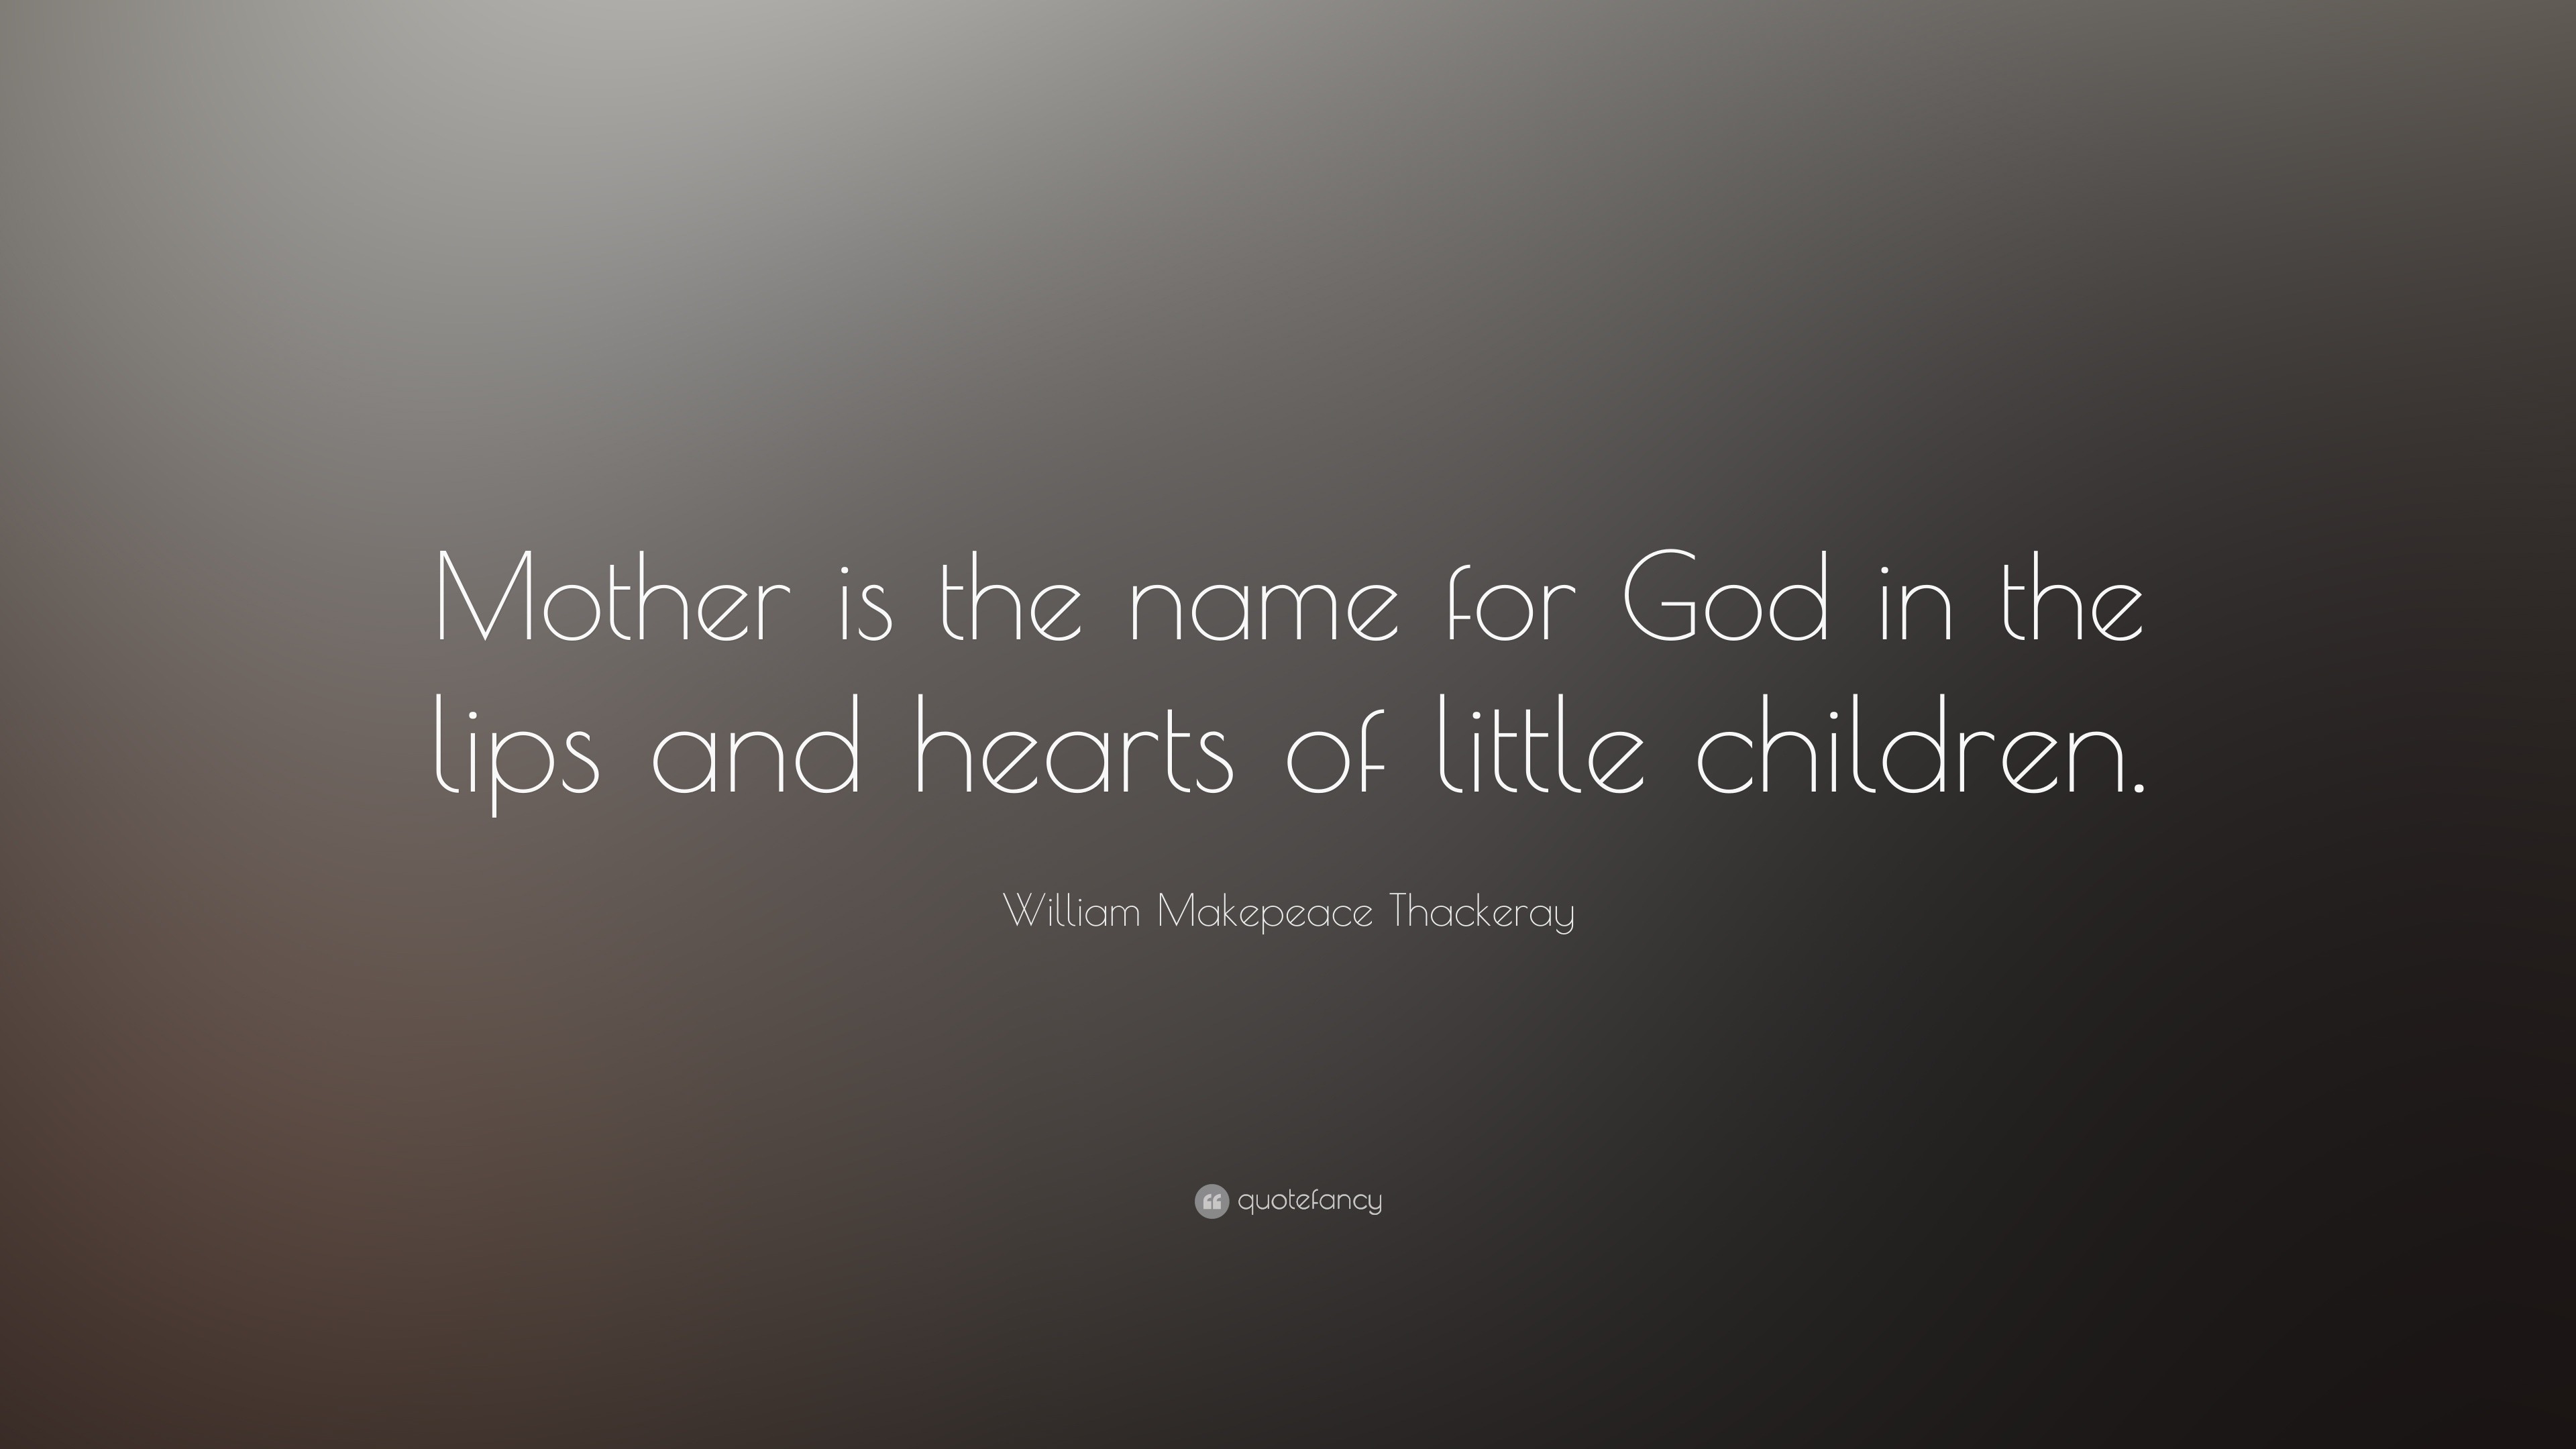 William Makepeace Thackeray Quote: “Mother is the name for God in the lips and hearts of